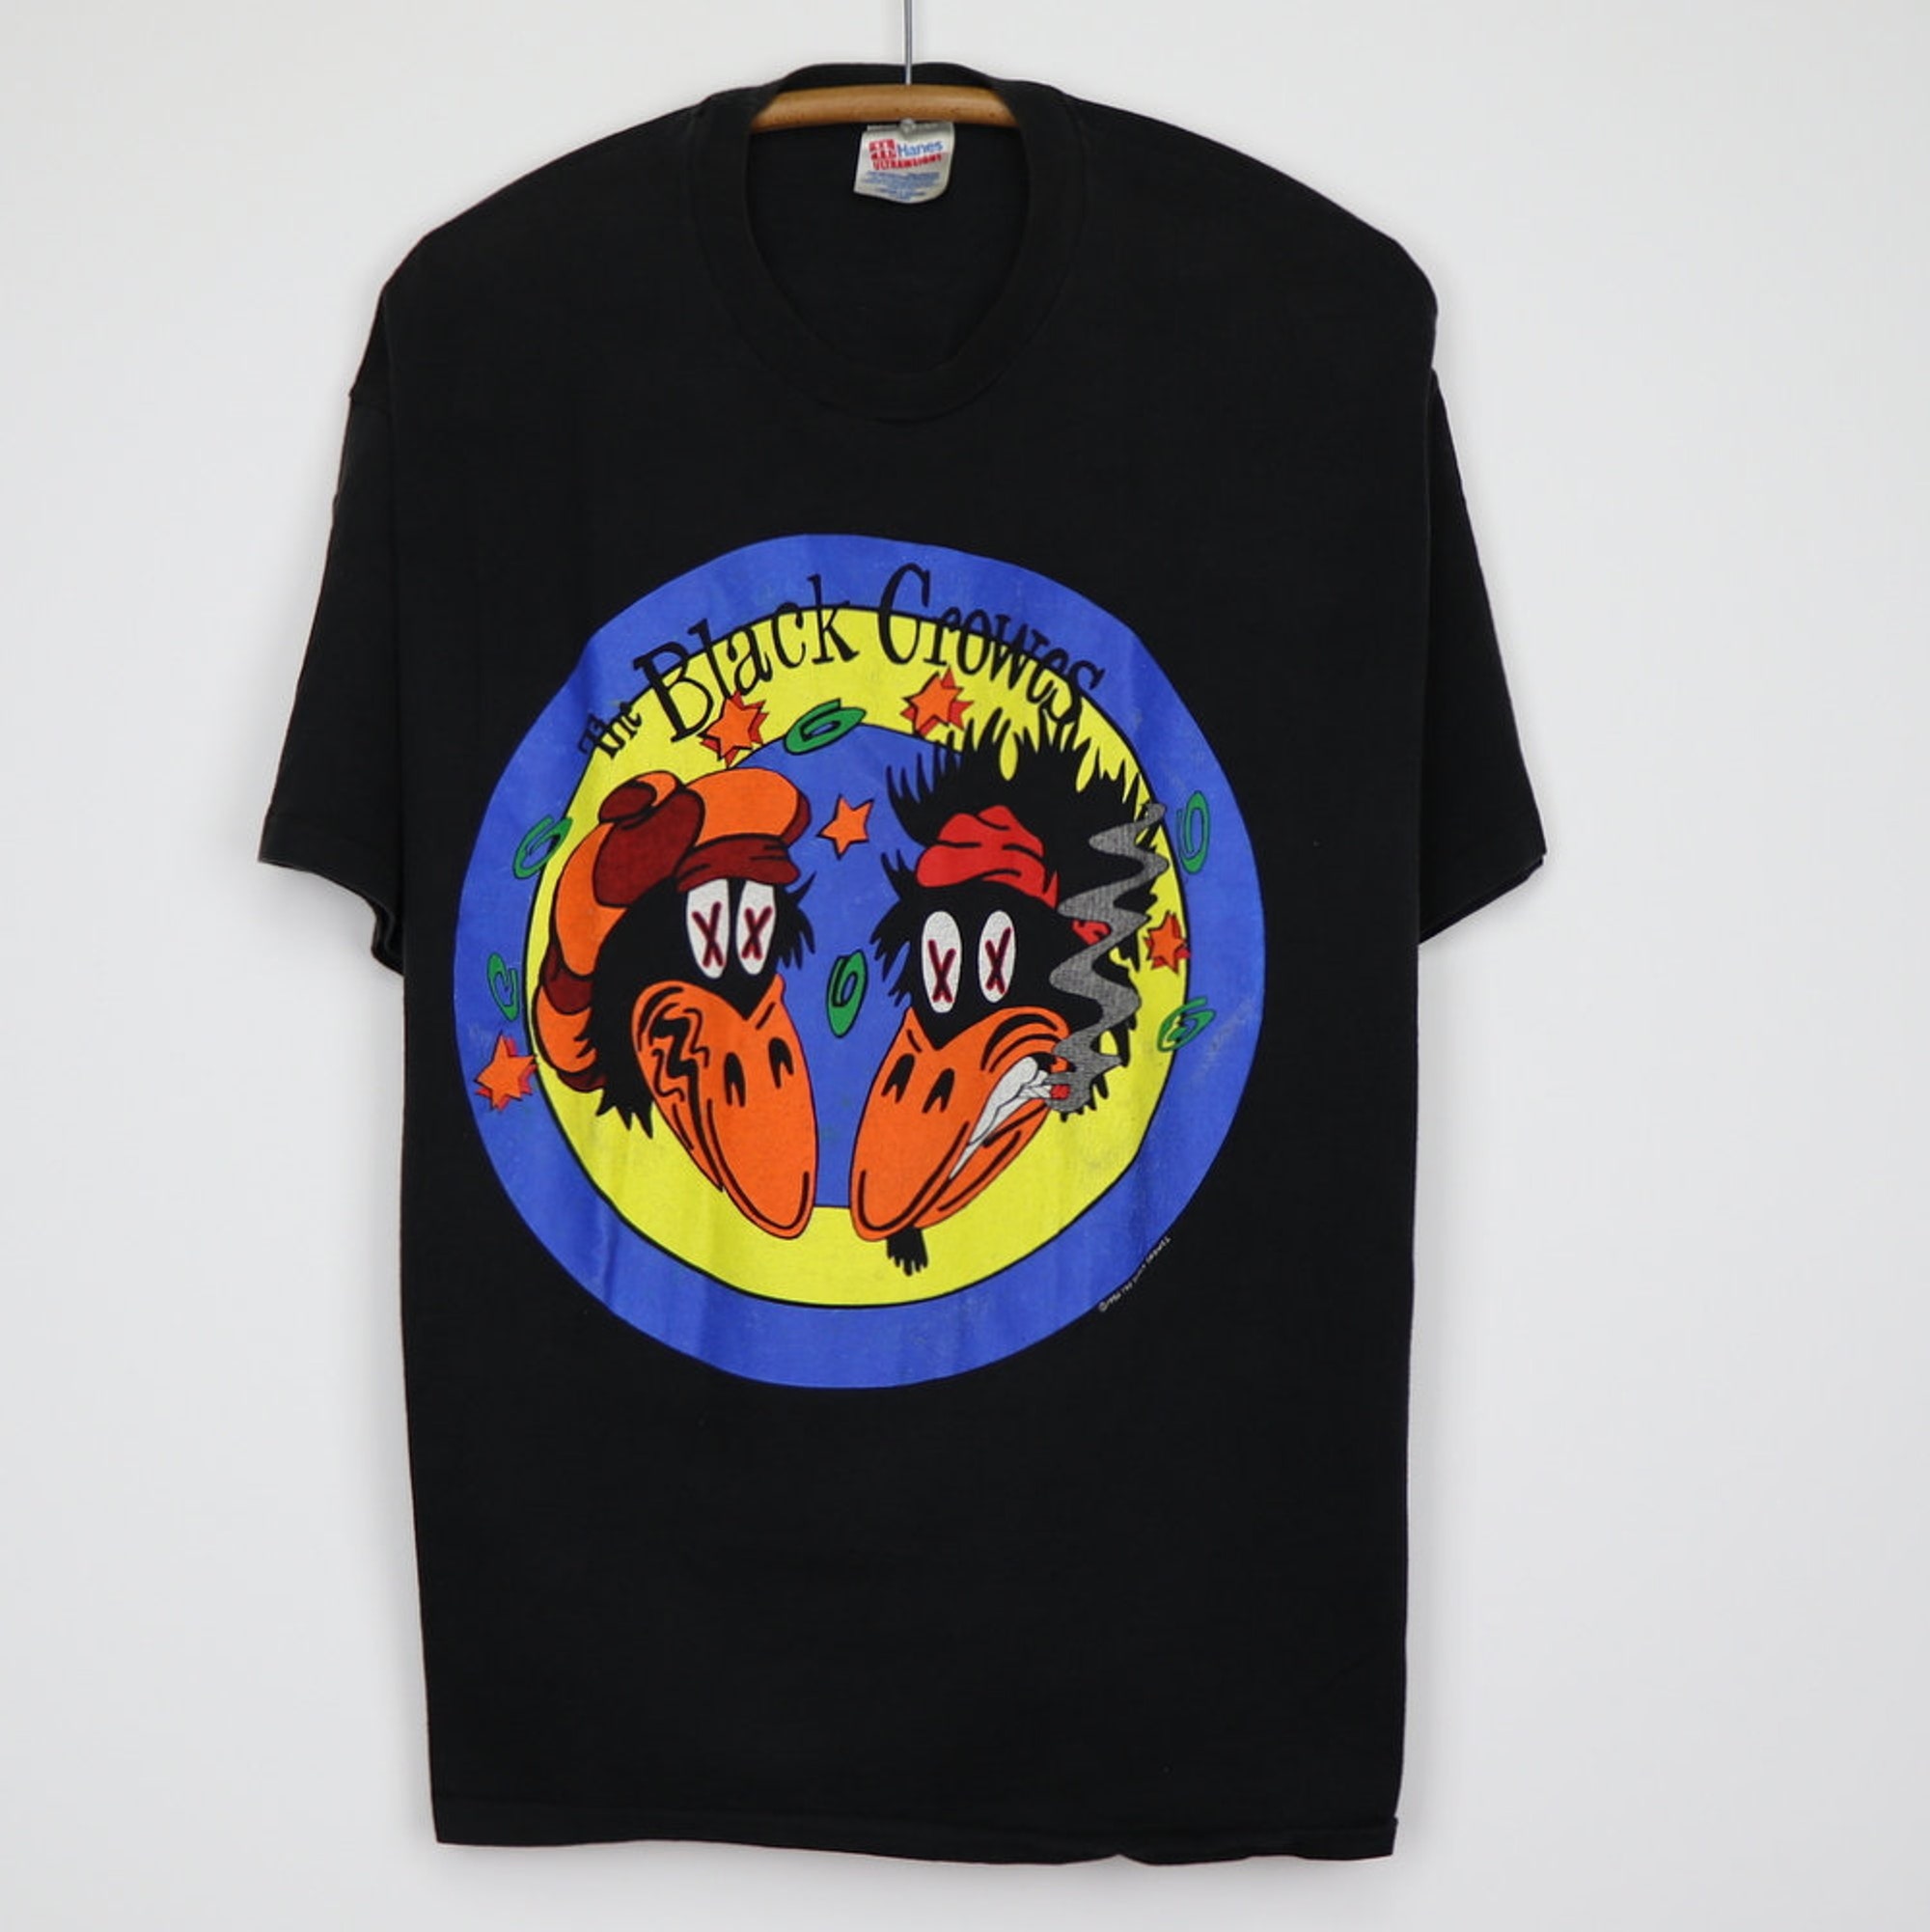 vintage 1993 Black Crowes As High As The Moon Tour Shirt